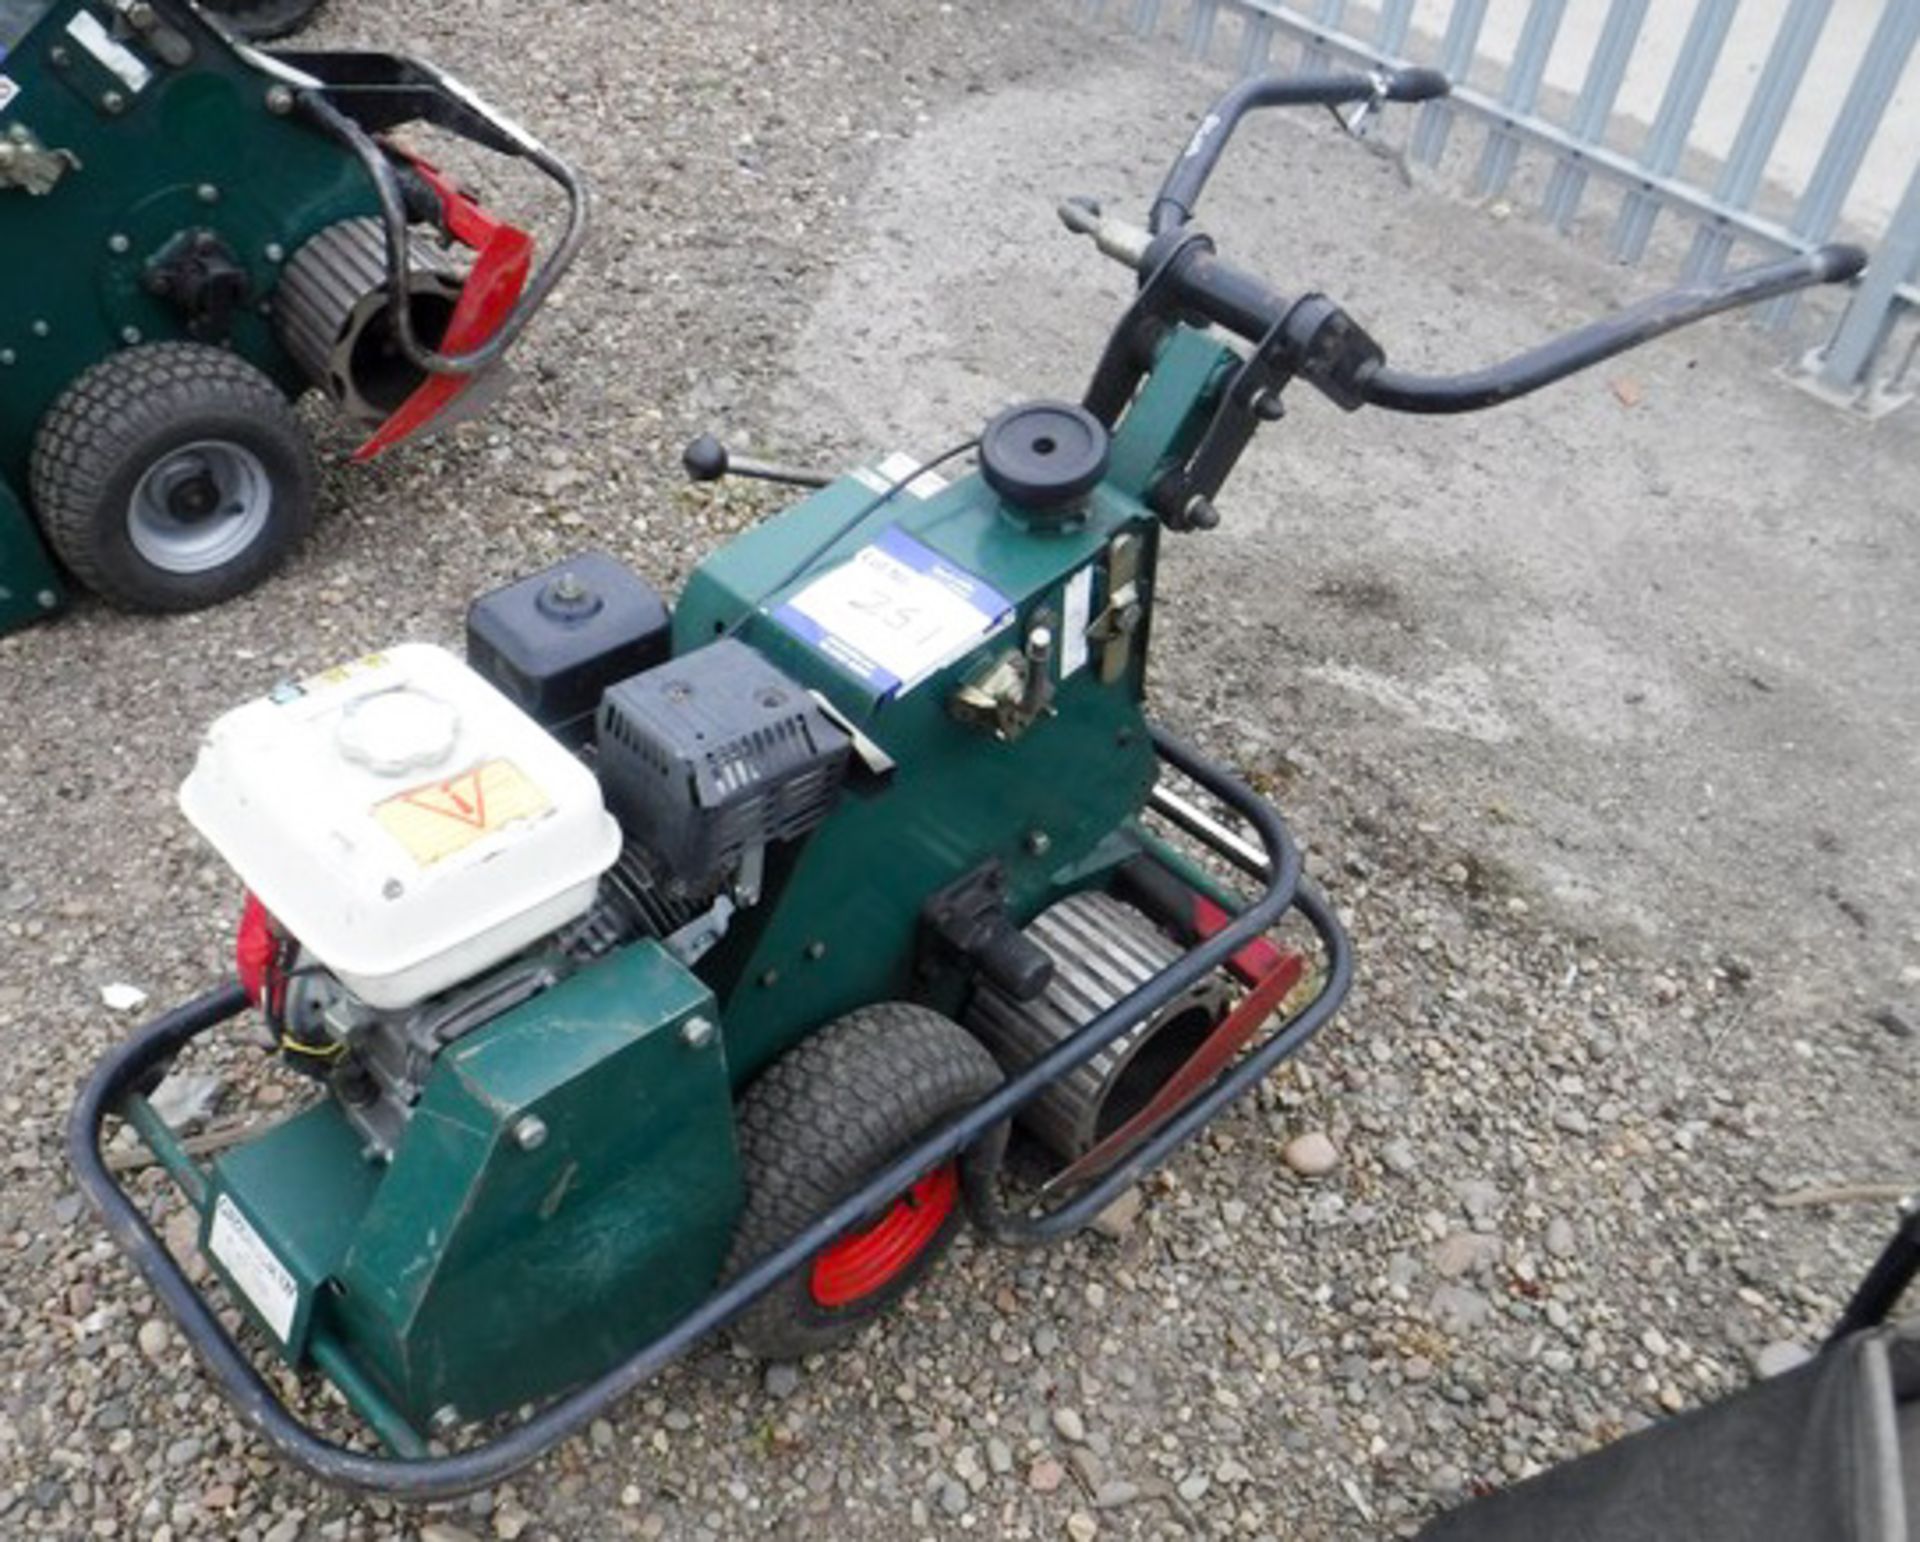 GROUNDSMAN turf cutter. Model TCDRB34. Year 2008. S/N T0506IDRB - Image 2 of 3